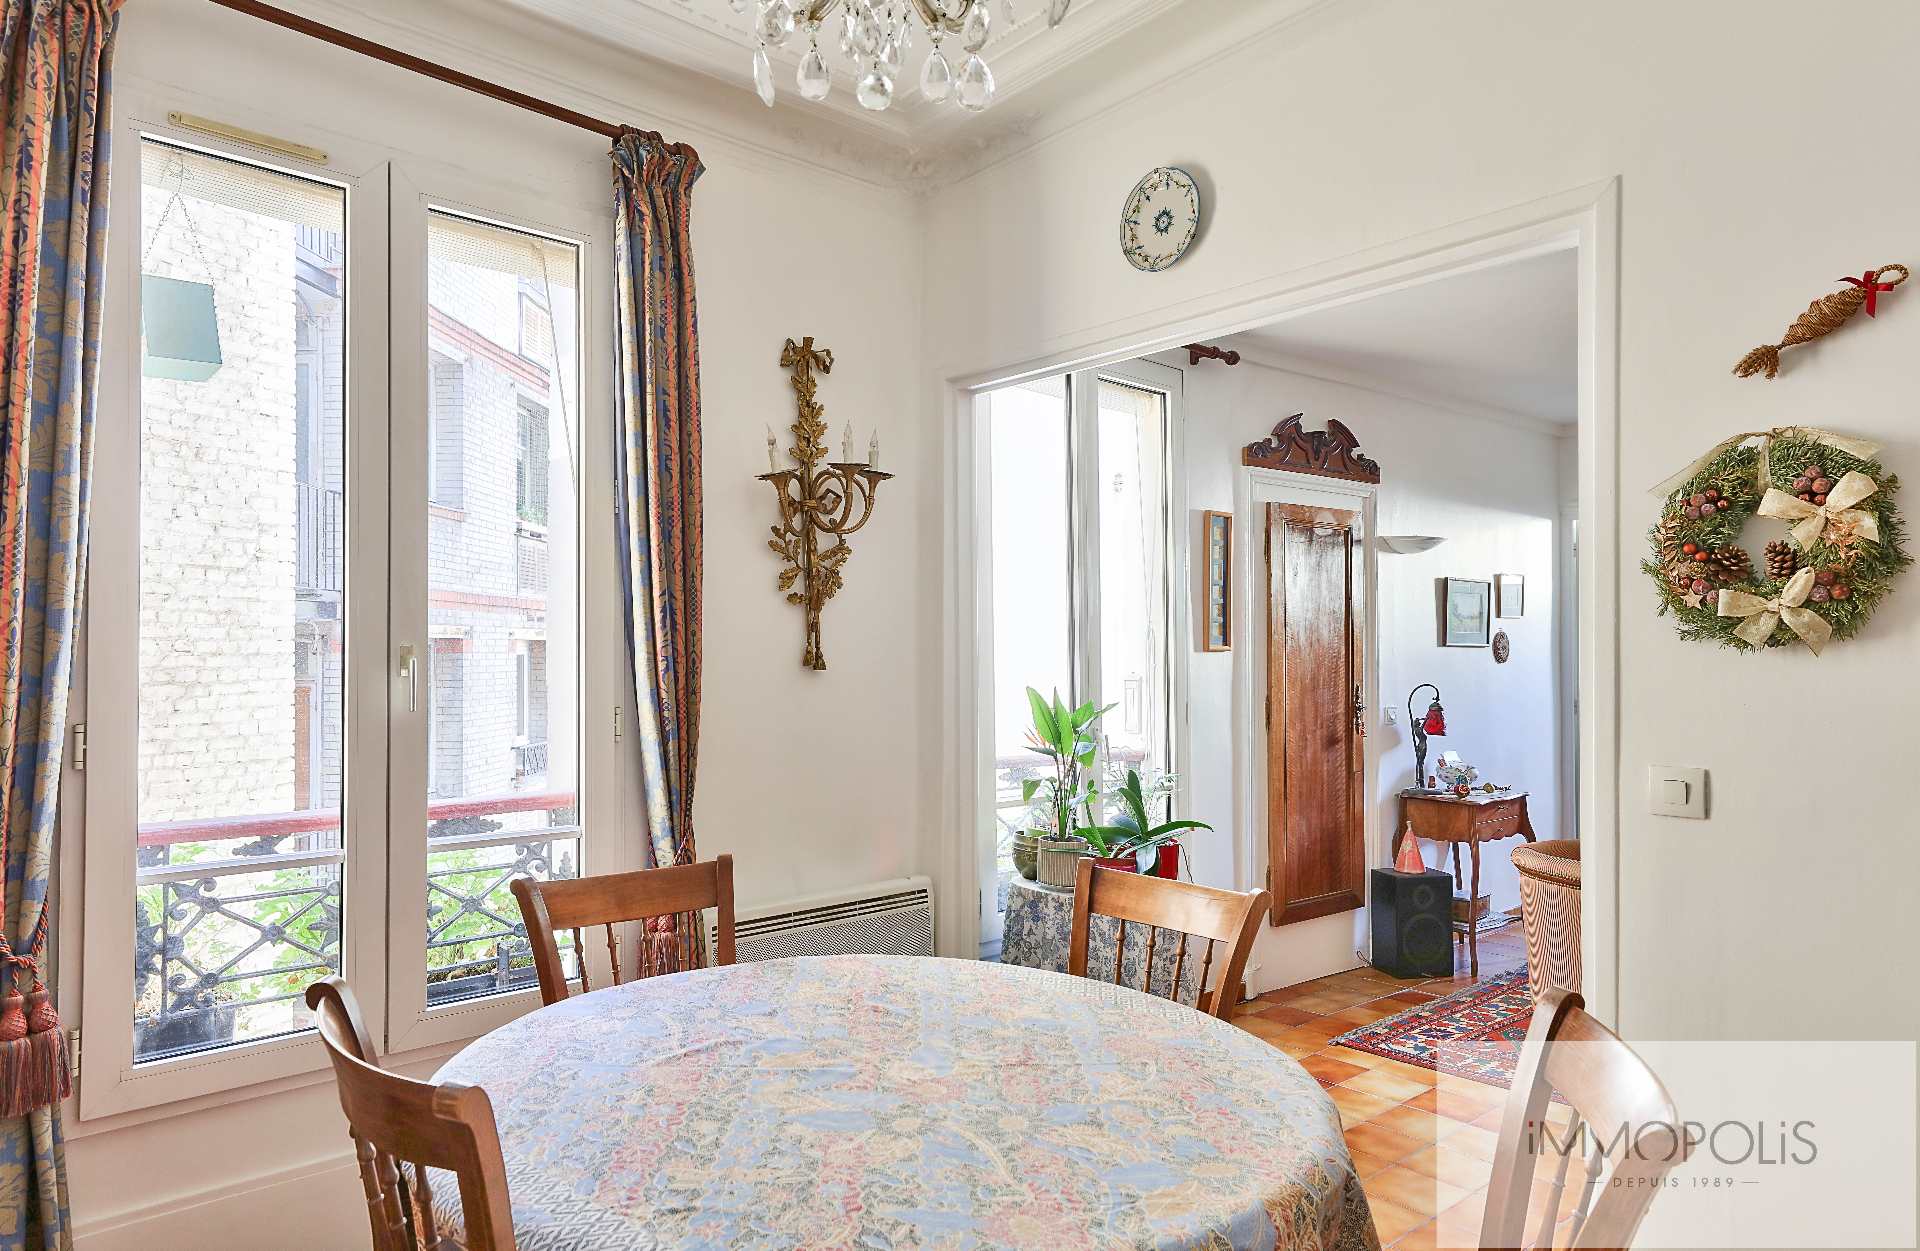 Beautiful 4 rooms in Montmartre, in the 3rd floor with elevator in a beautiful stone building 1